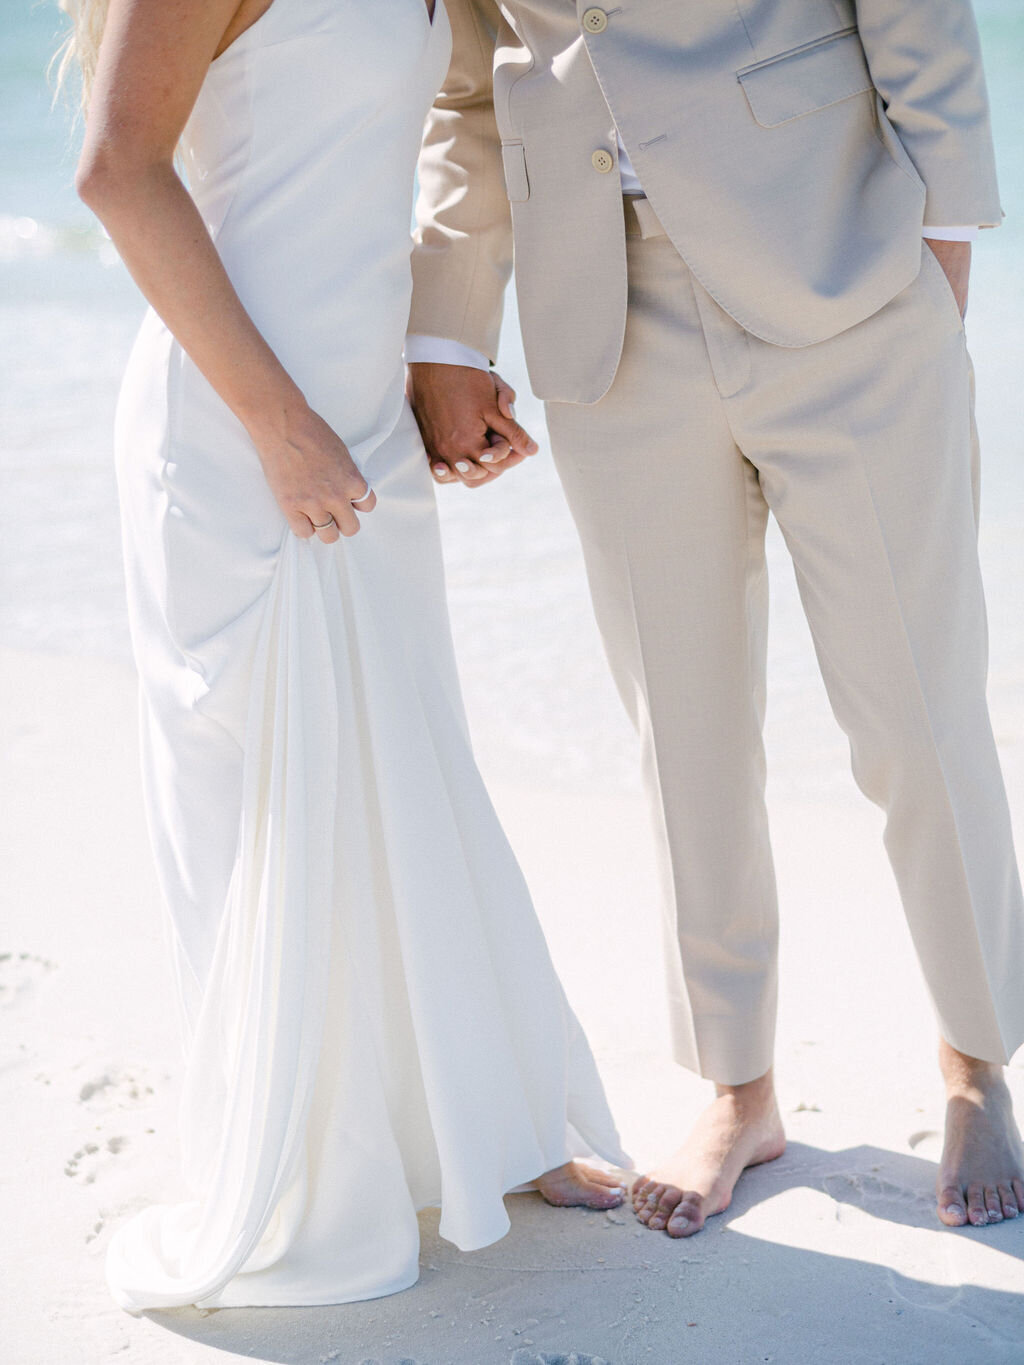 Bride and groom holding hands at destination wedding at Rosemary beach Florida